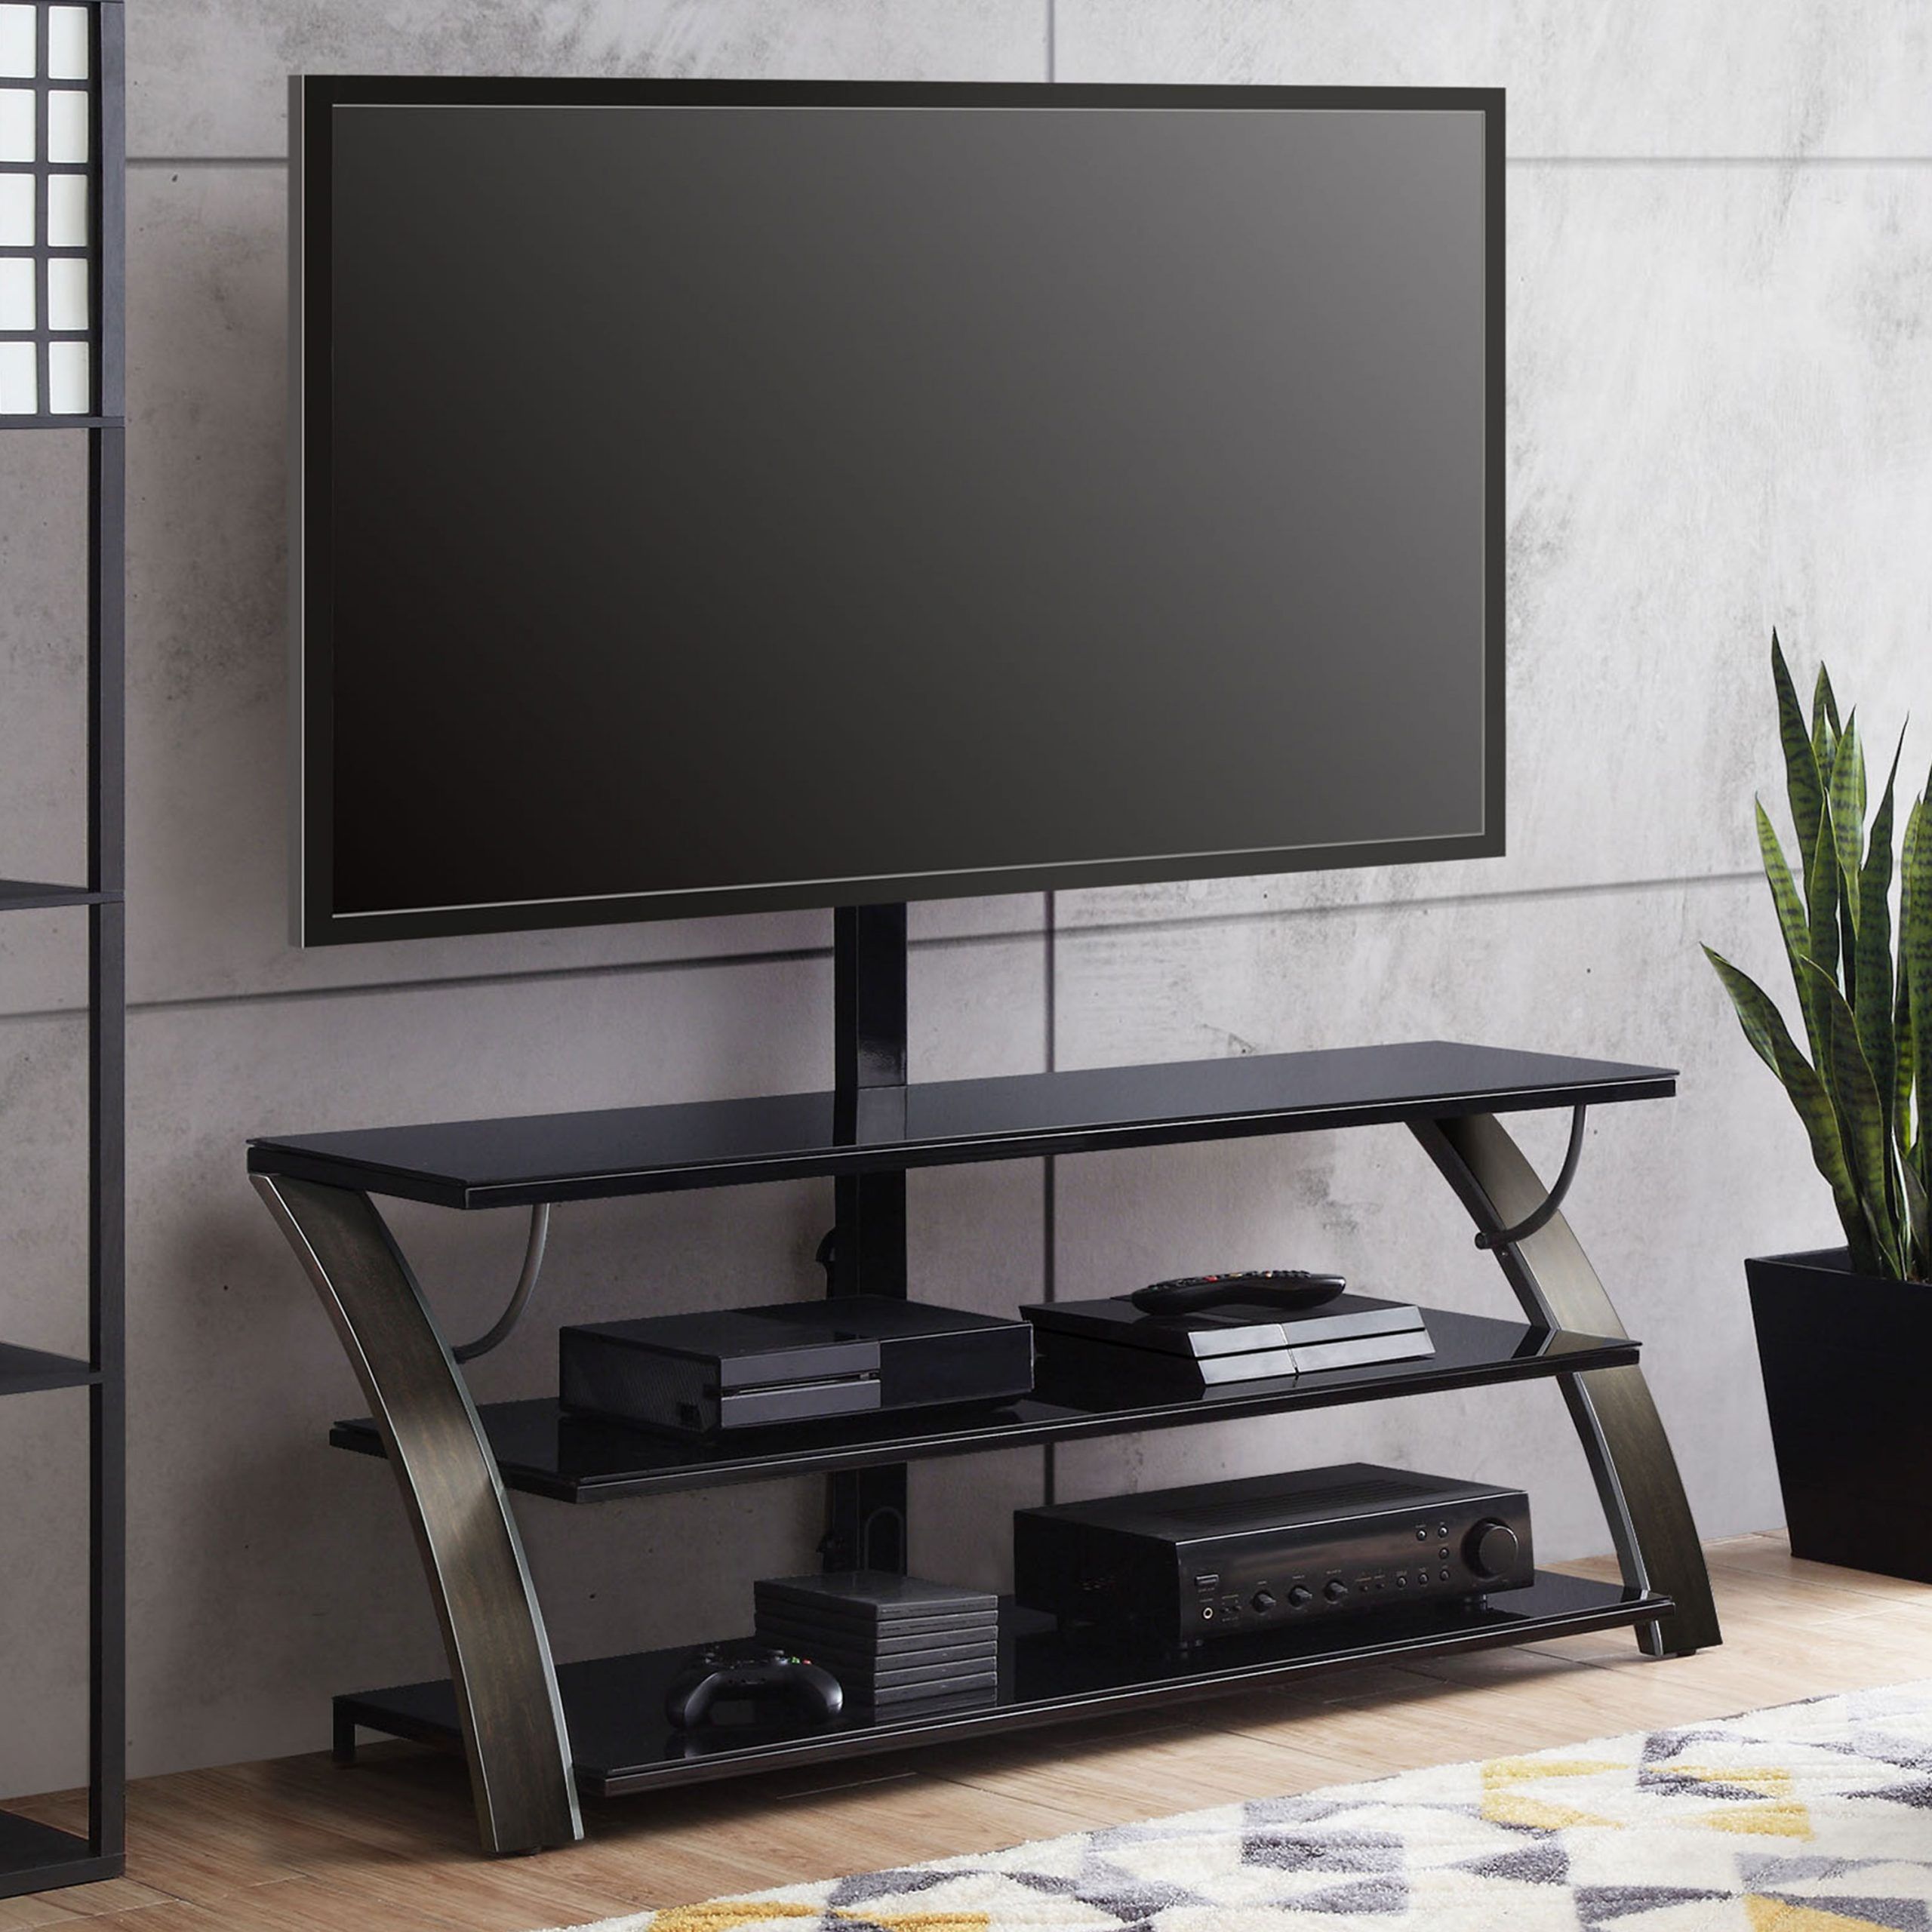 Whalen Payton 3 In 1 Flat Panel Tv Stand For Tvs Up To 65 Pertaining To Binegar Tv Stands For Tvs Up To 65" (View 8 of 15)